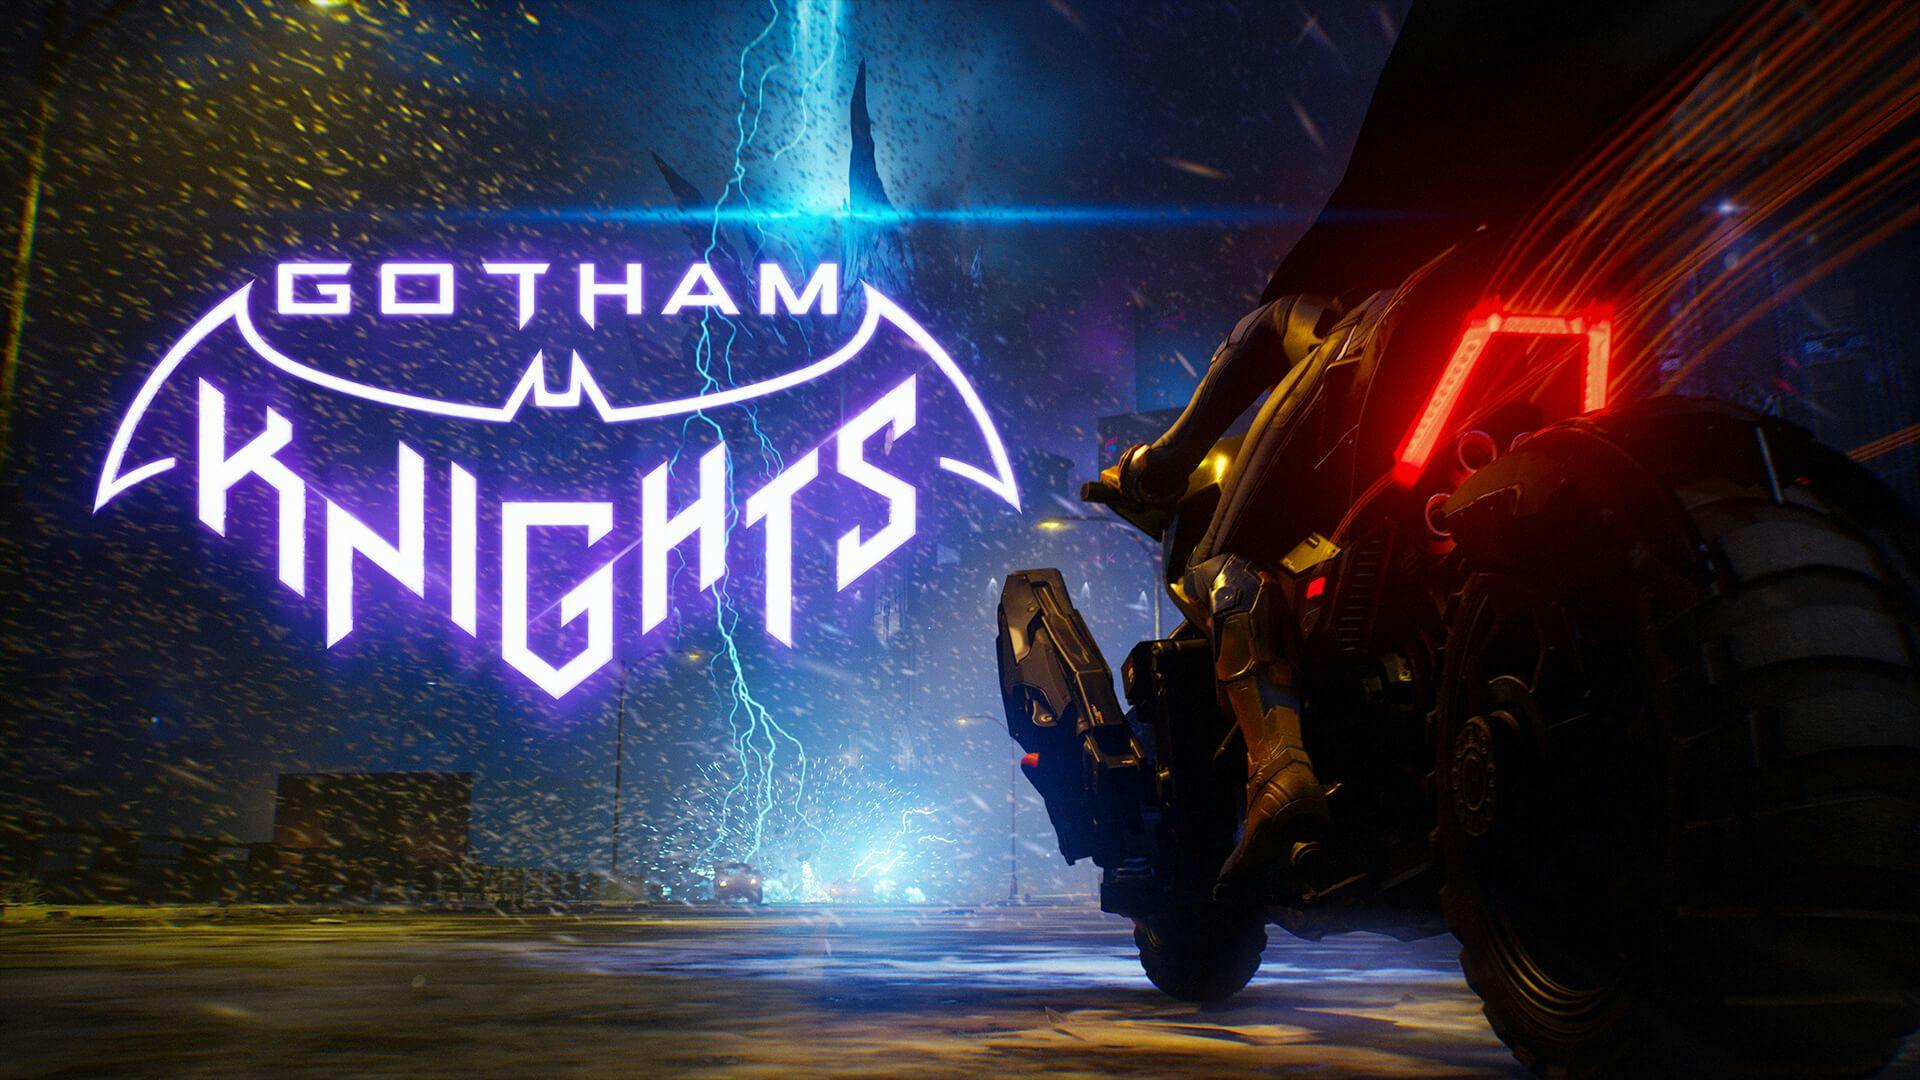 featured image - The Next Batman Game 'Gotham Knights' Release Date, Story, Gameplay